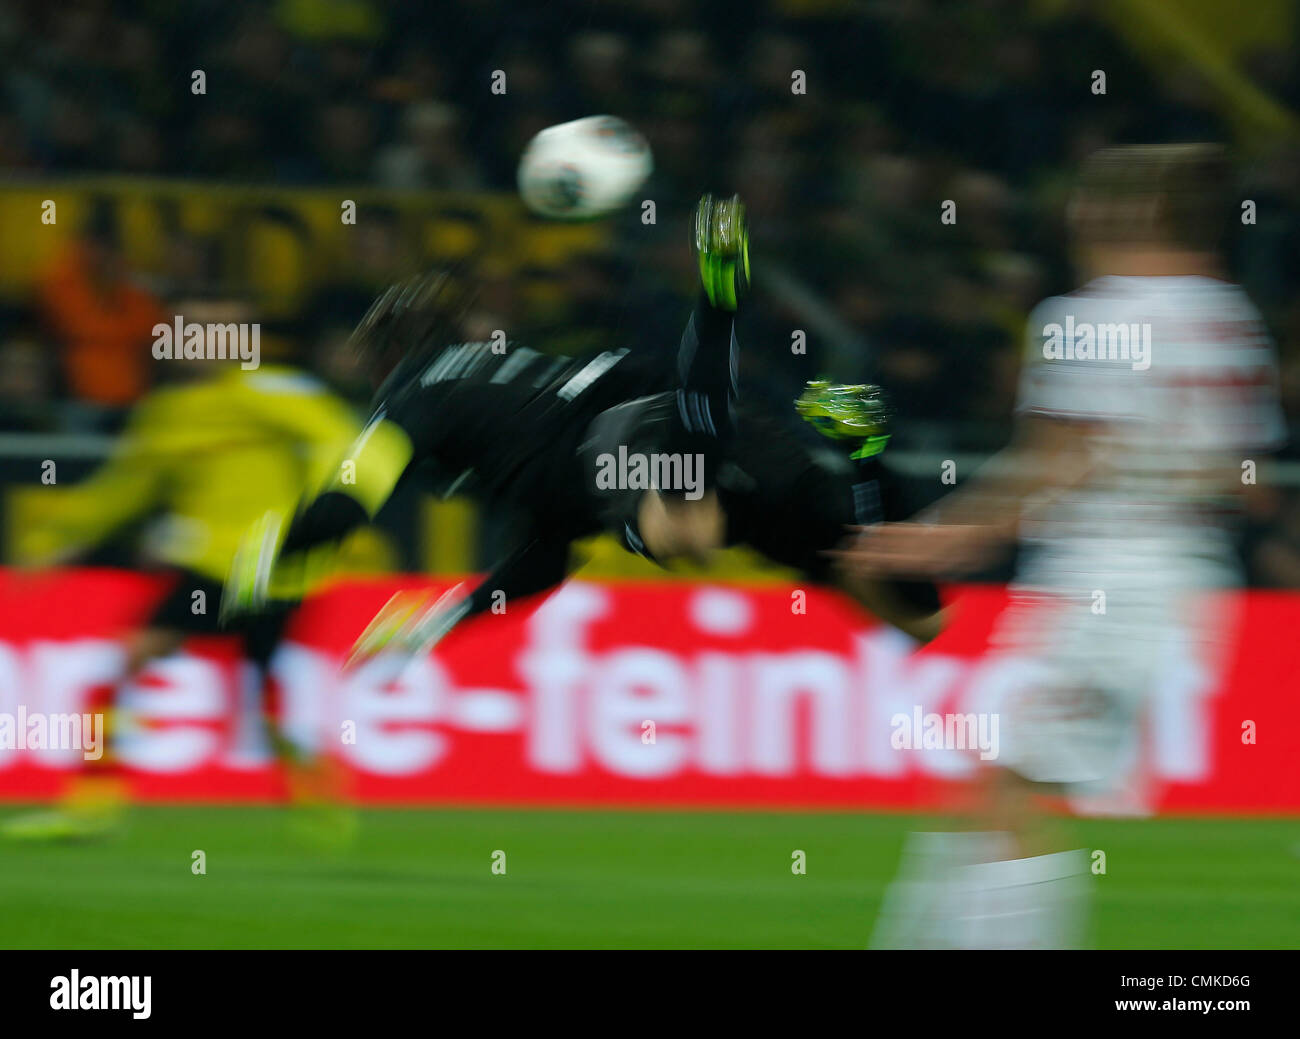 Fussball Torwart High Resolution Stock Photography and Images - Alamy